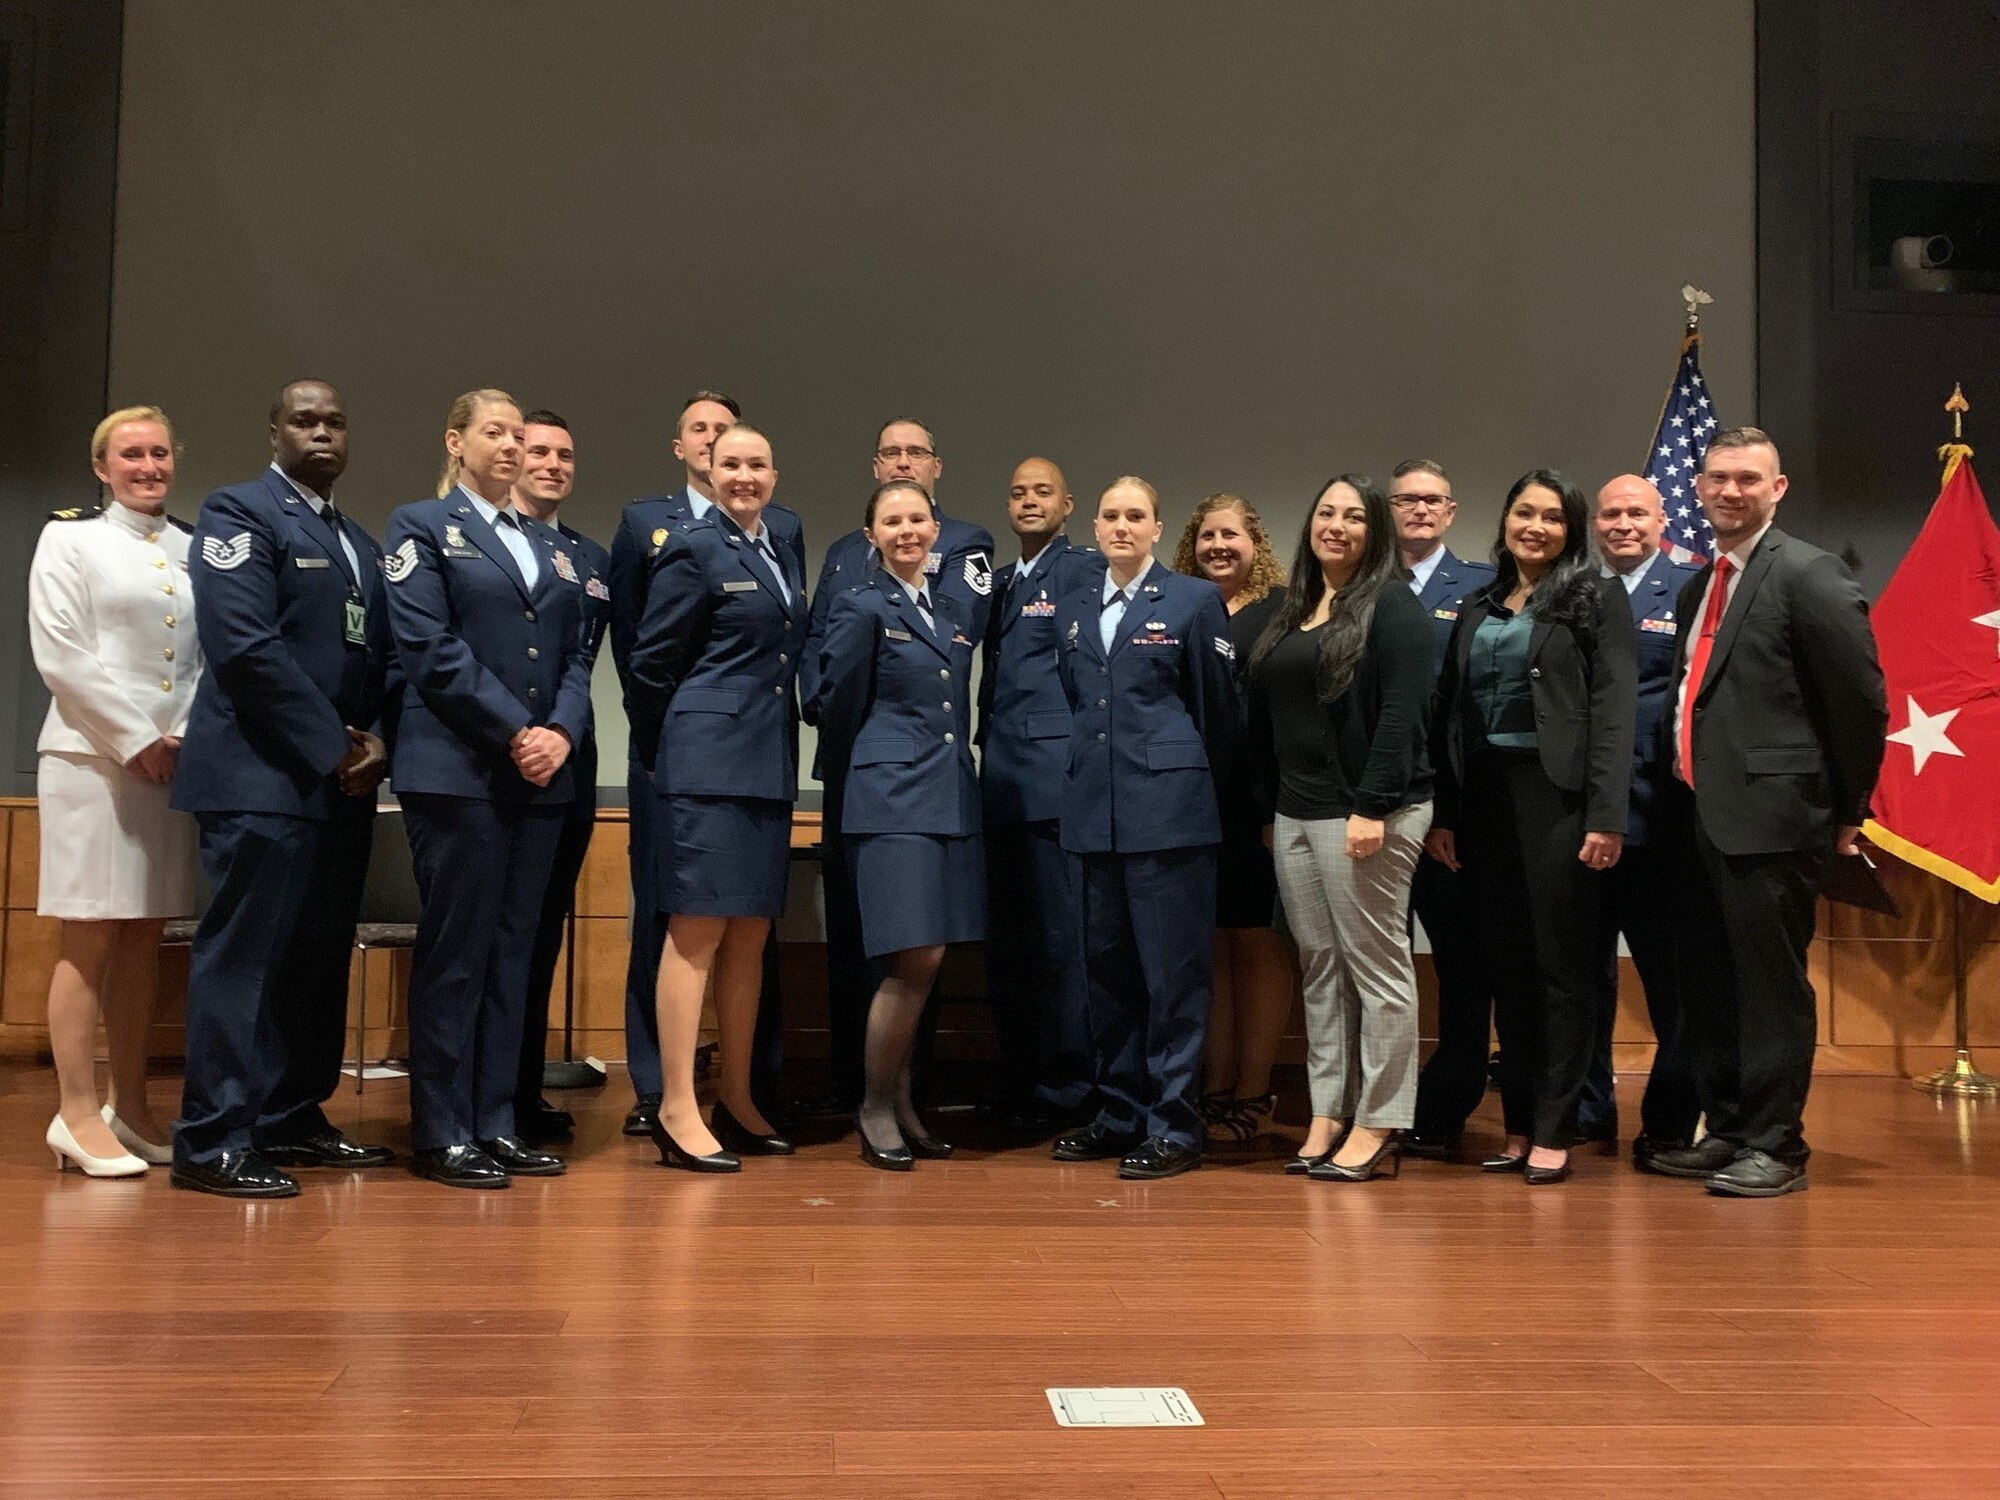 The Department of Defense Sexual Assault Prevention and Response Office honors Airmen and Guardians for their exceptional work with victim support and prevention programs at a ceremony at the Mark Center, Alexandria VA, on 17 May 2022.